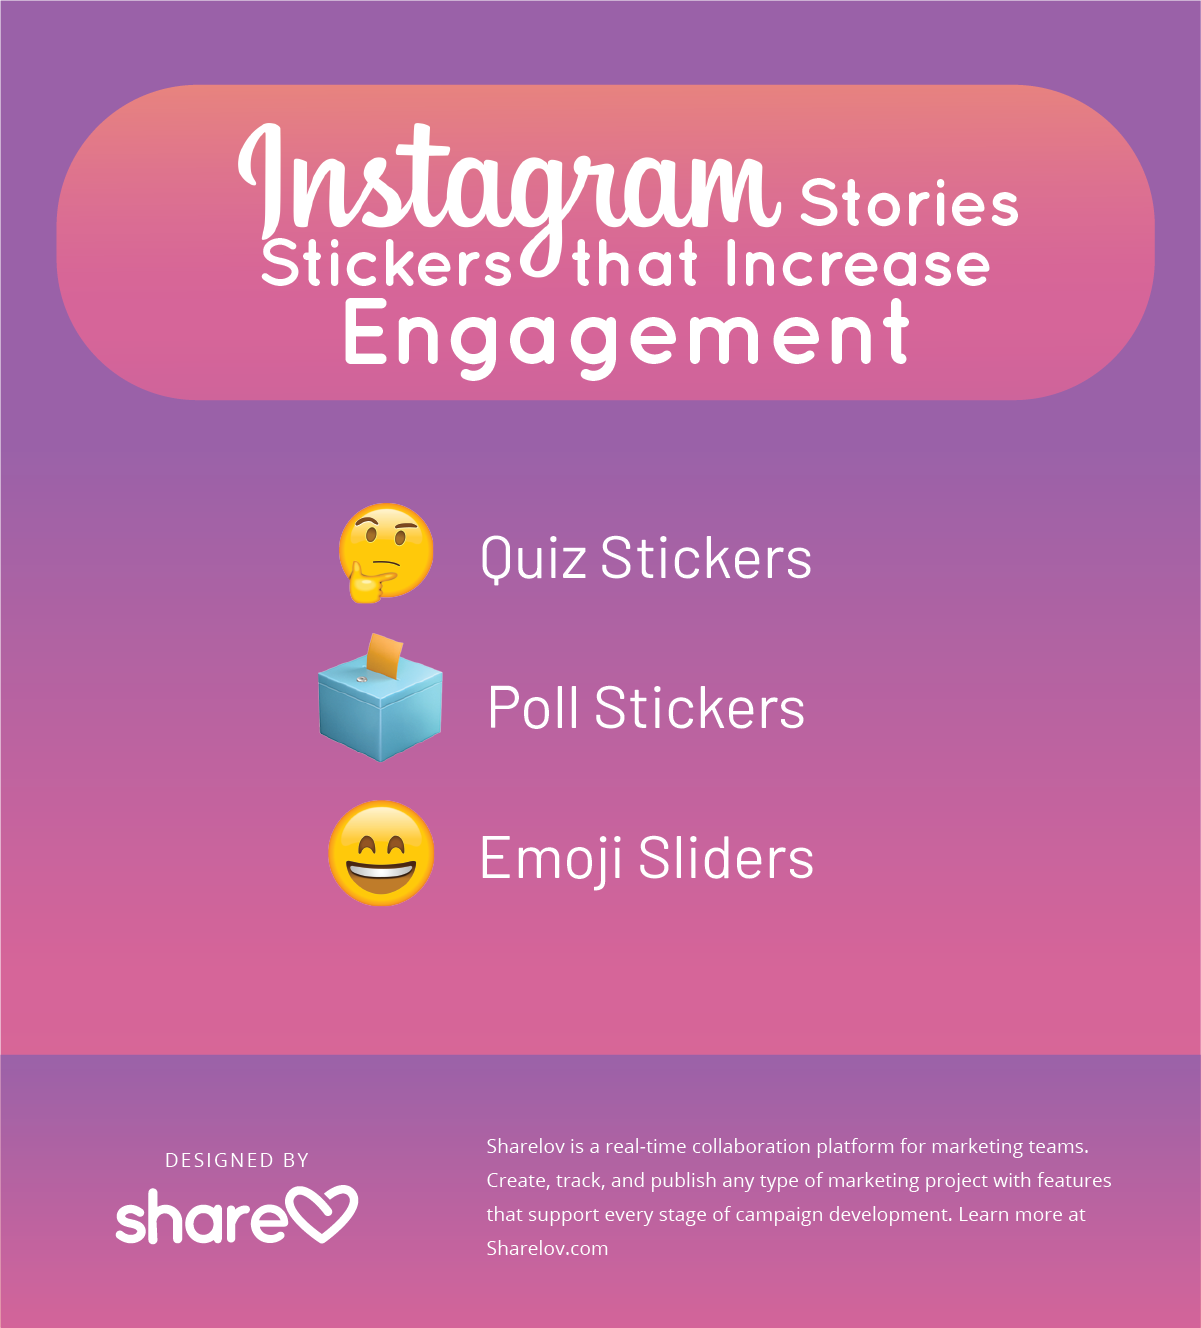 Instagram Stories Stickers that Increase Engagement